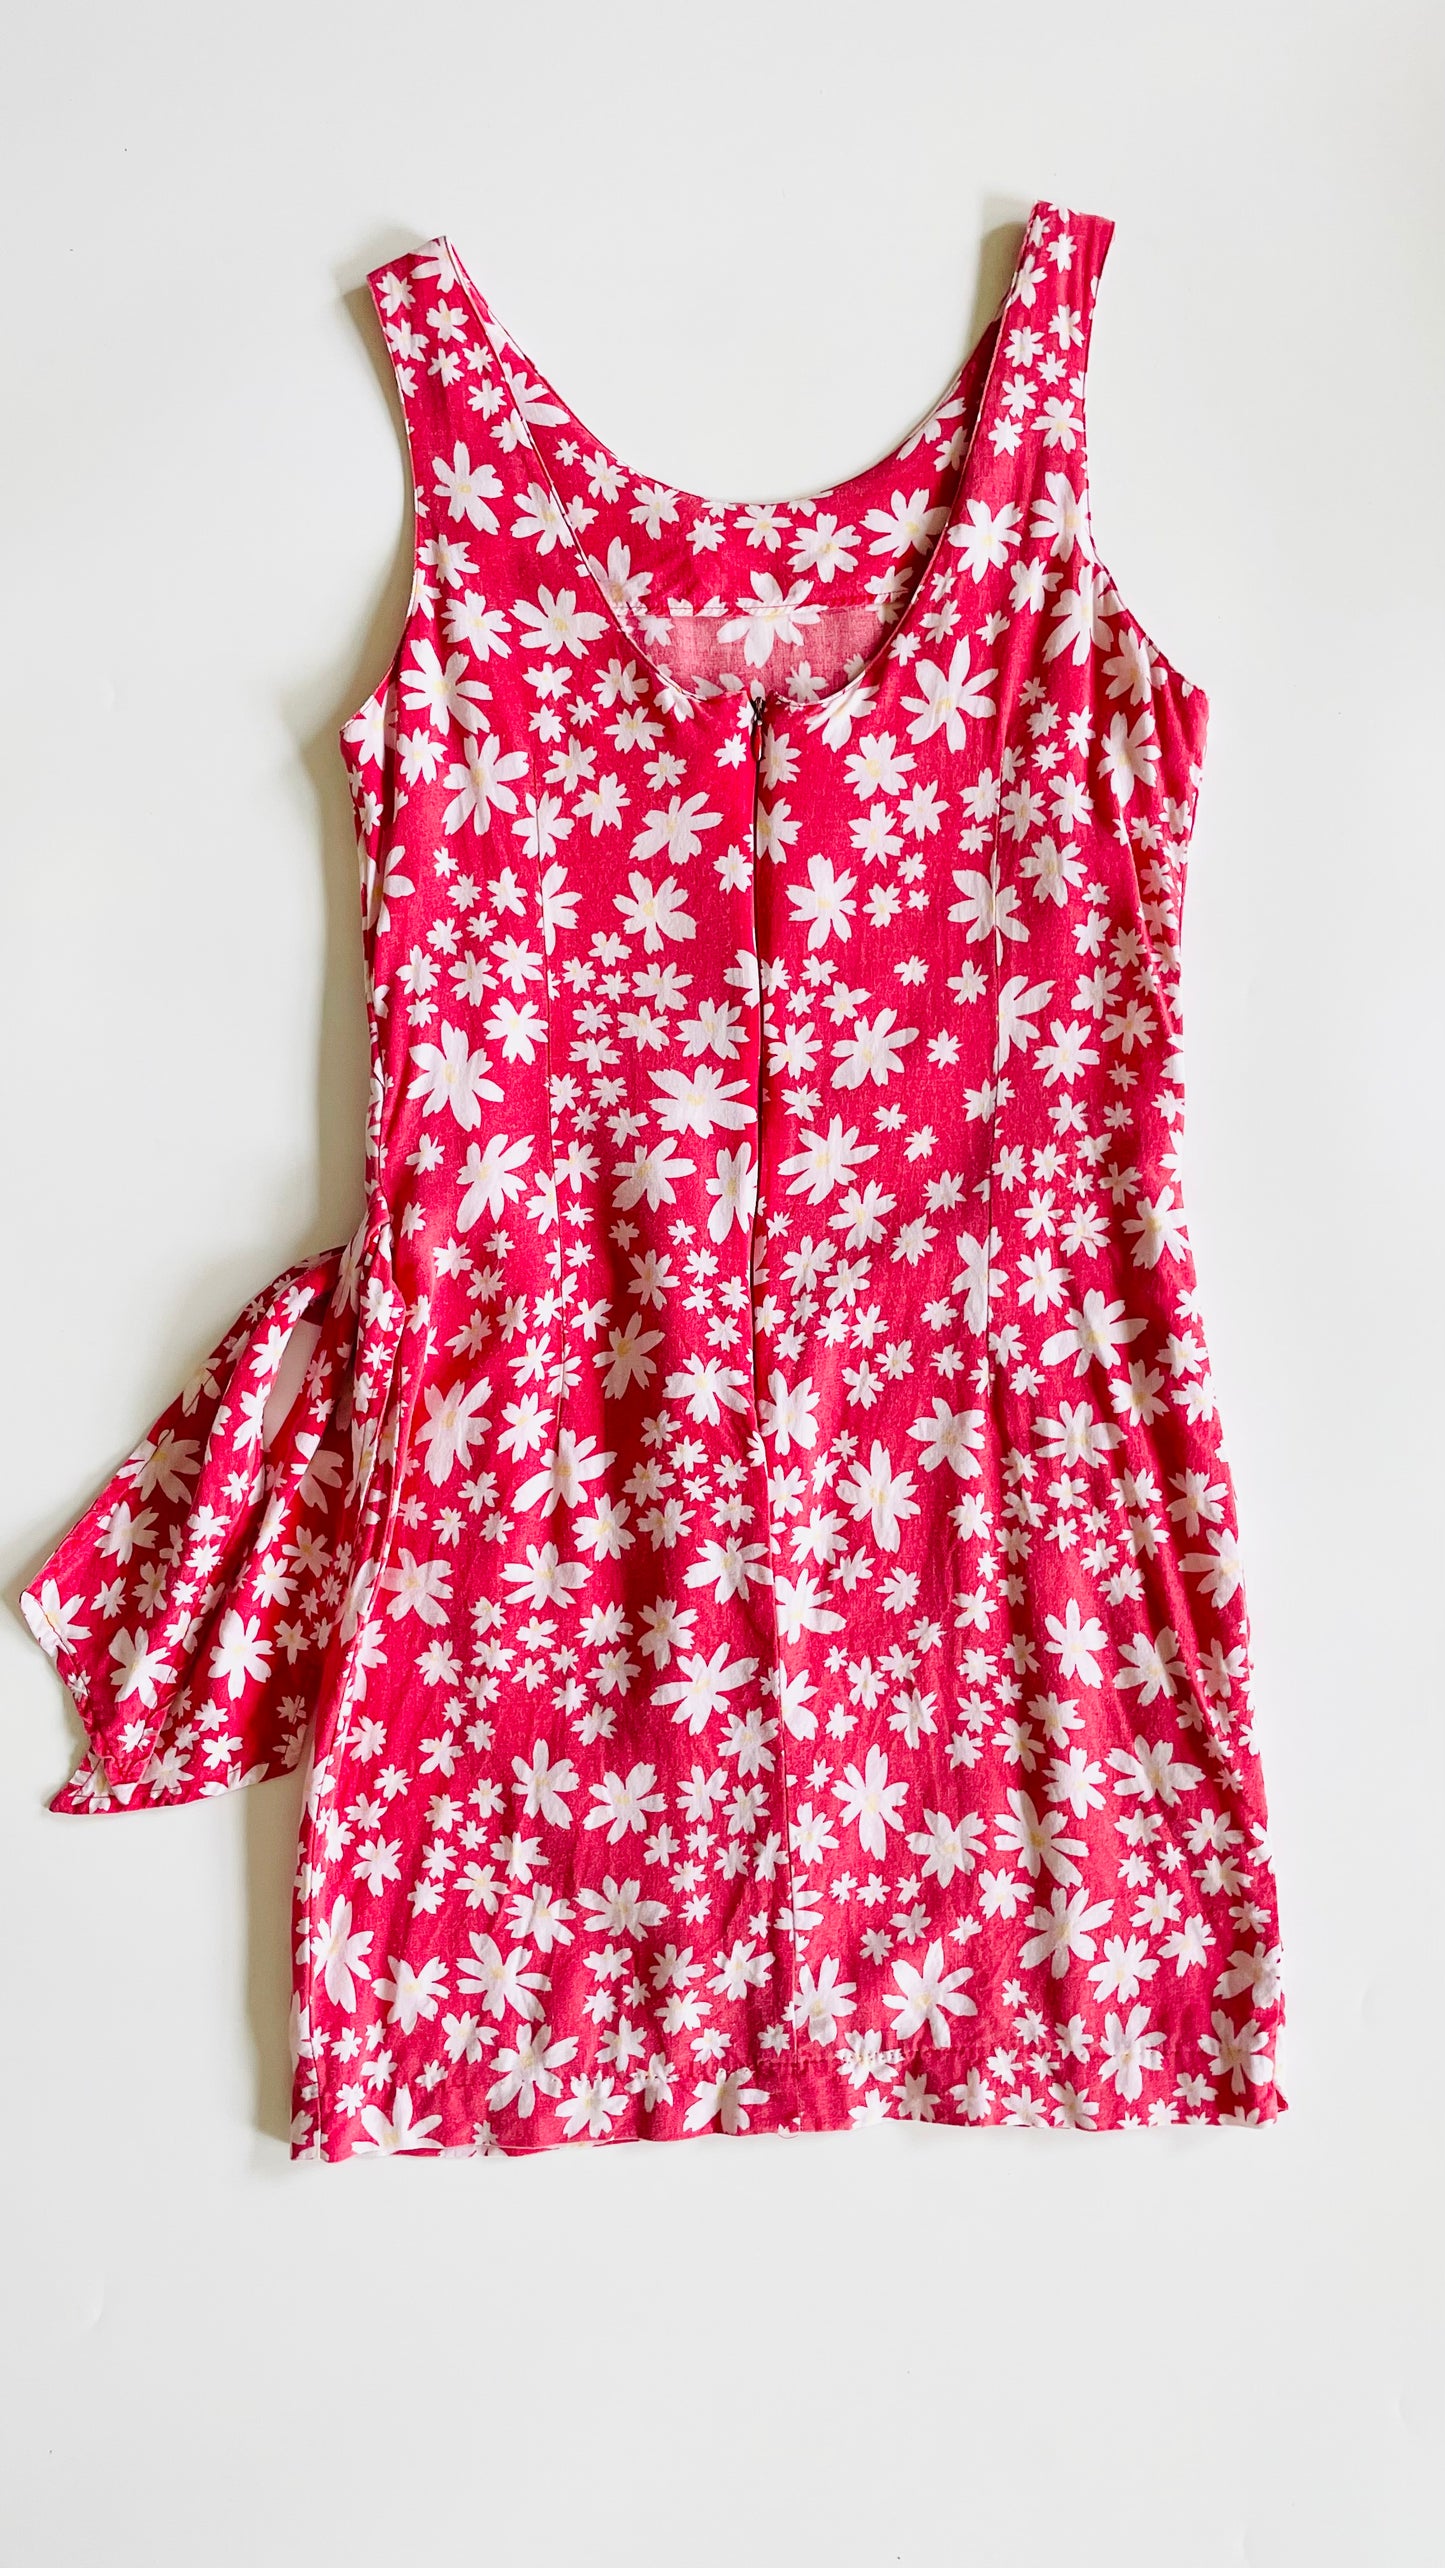 Vintage 90's GUESS red daisy print tank dress - Size M